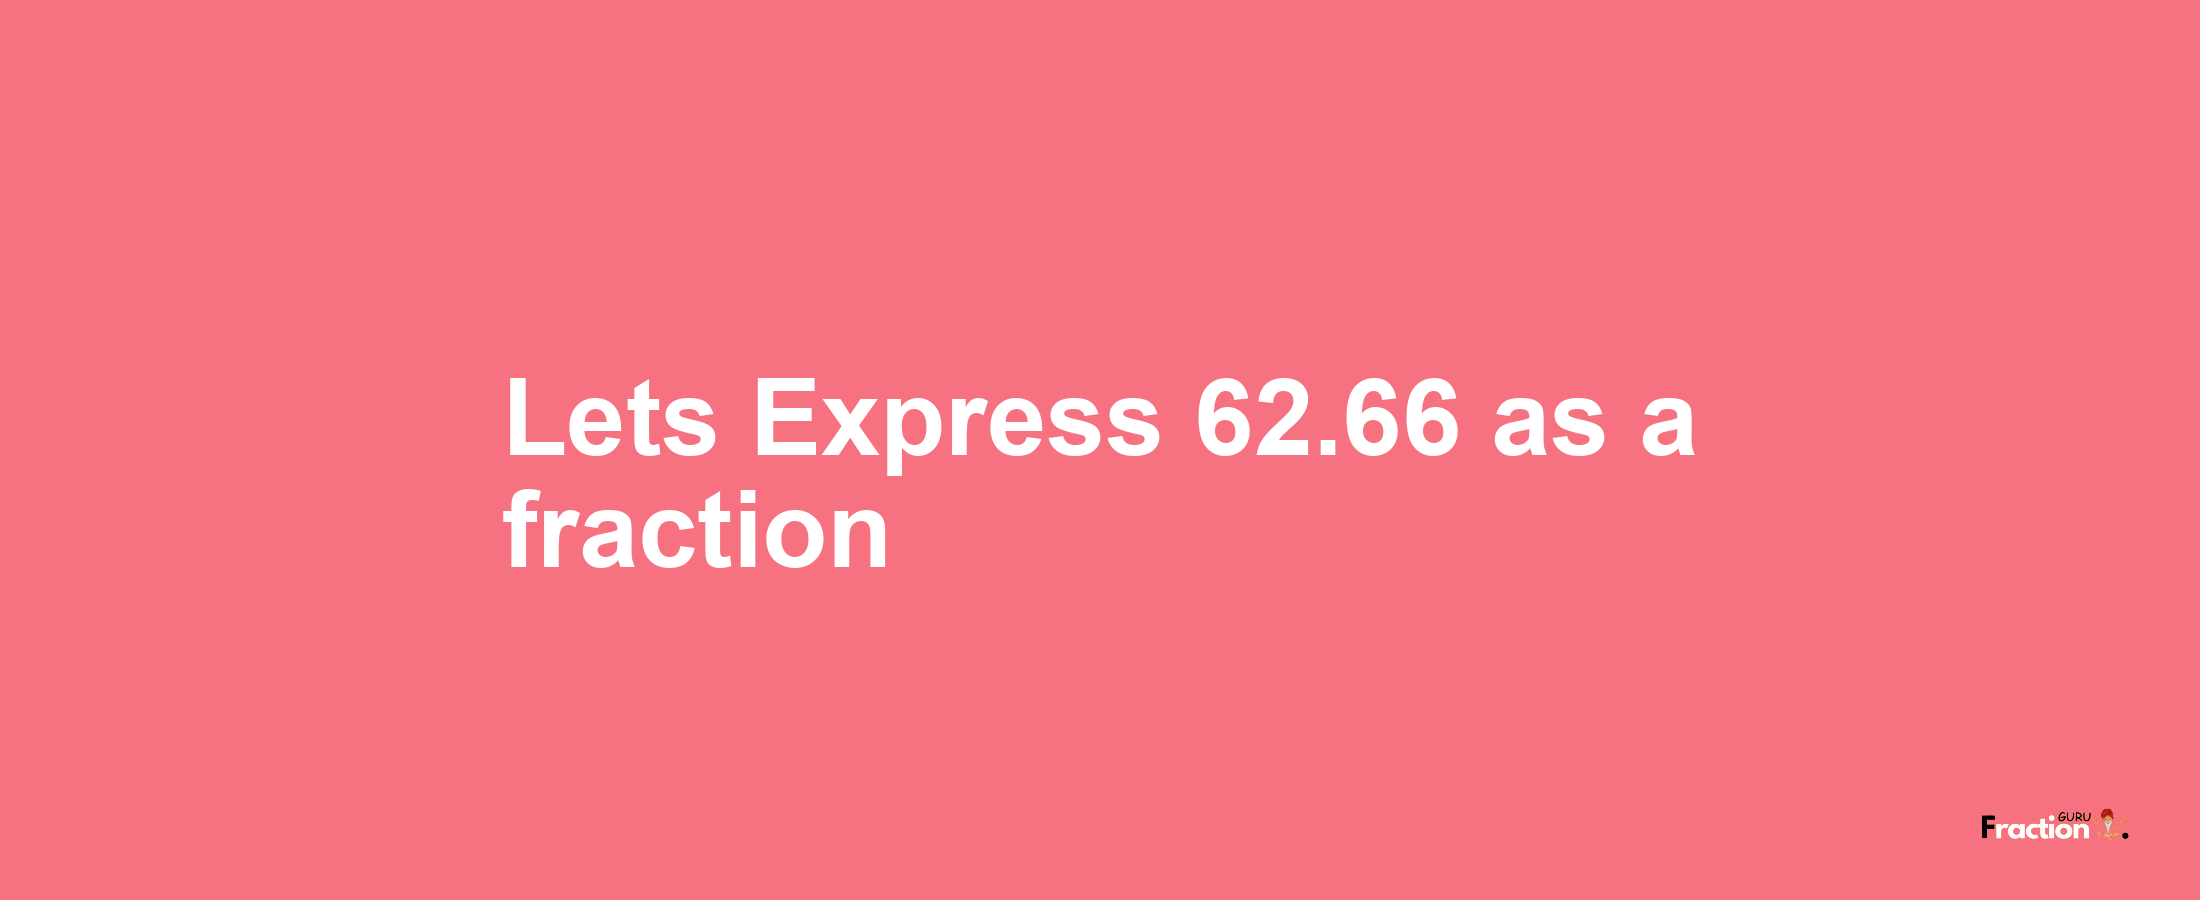 Lets Express 62.66 as afraction